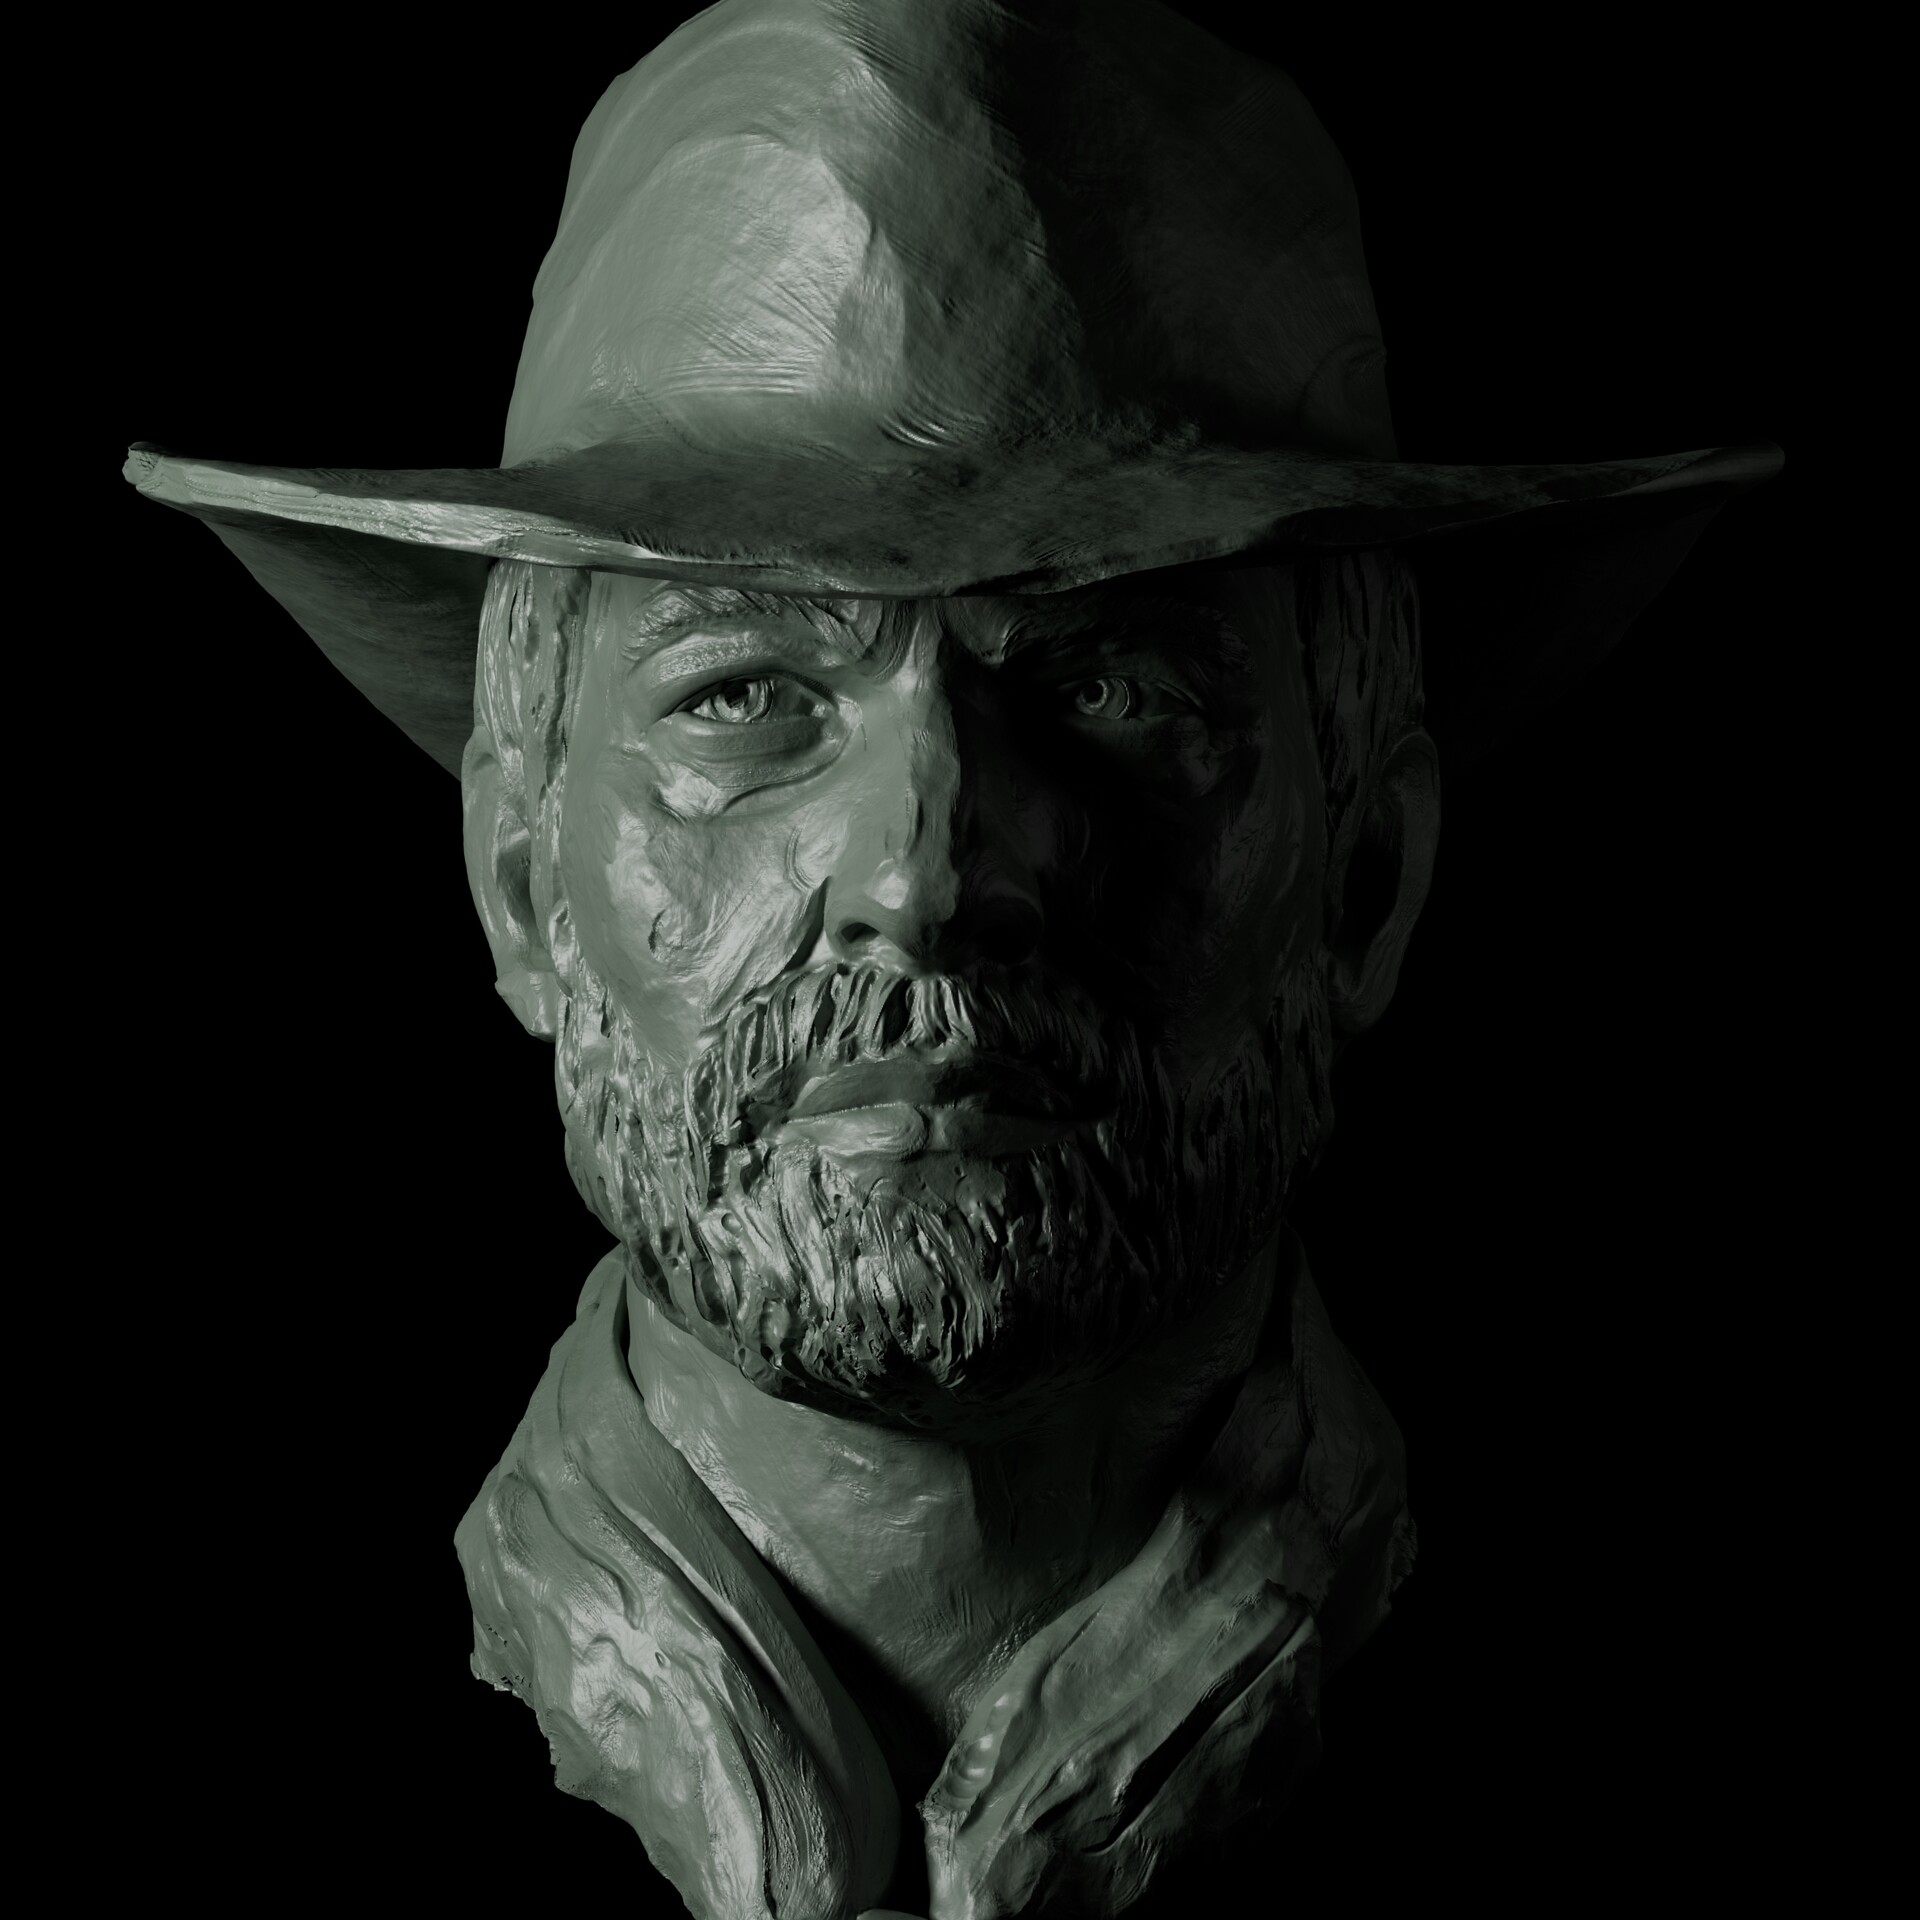 KREA - Arthur Morgan from Red Dead Redemption 2 drawn in the style of  Borderlands